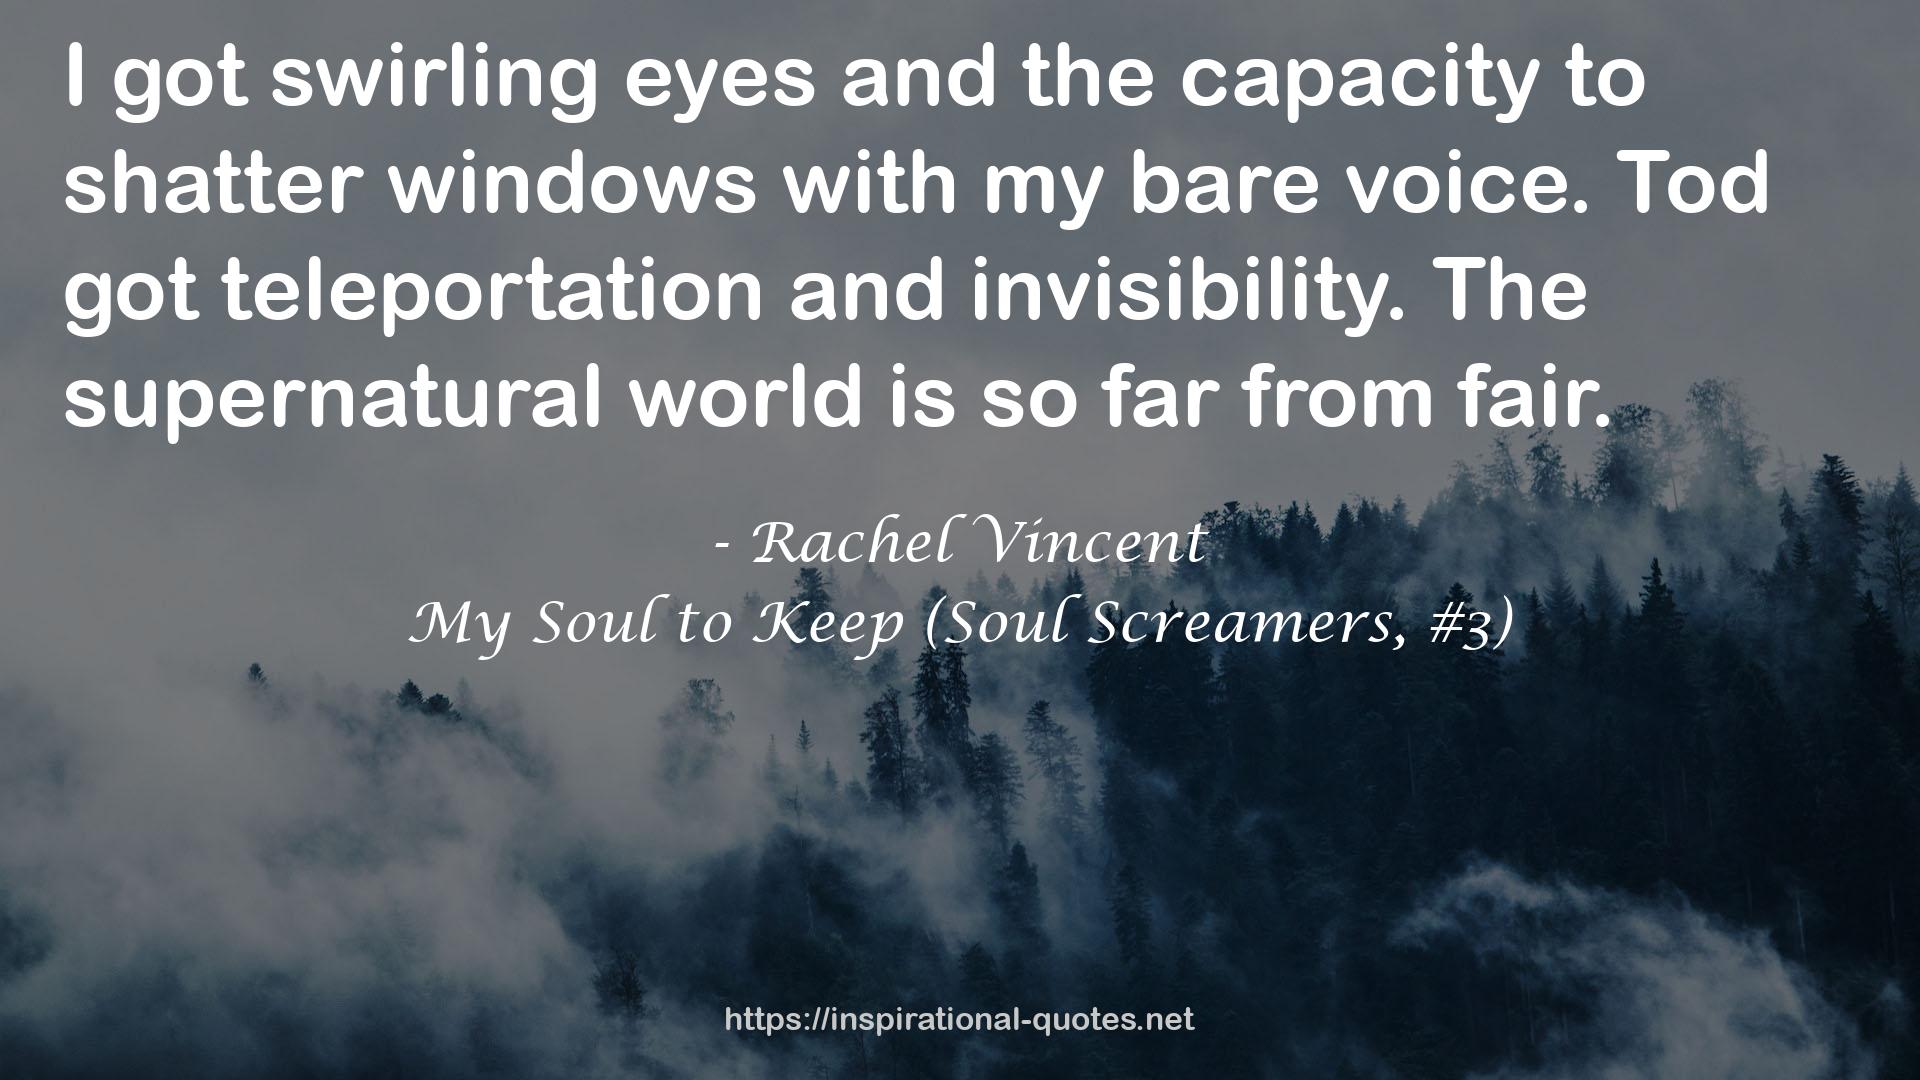 My Soul to Keep (Soul Screamers, #3) QUOTES